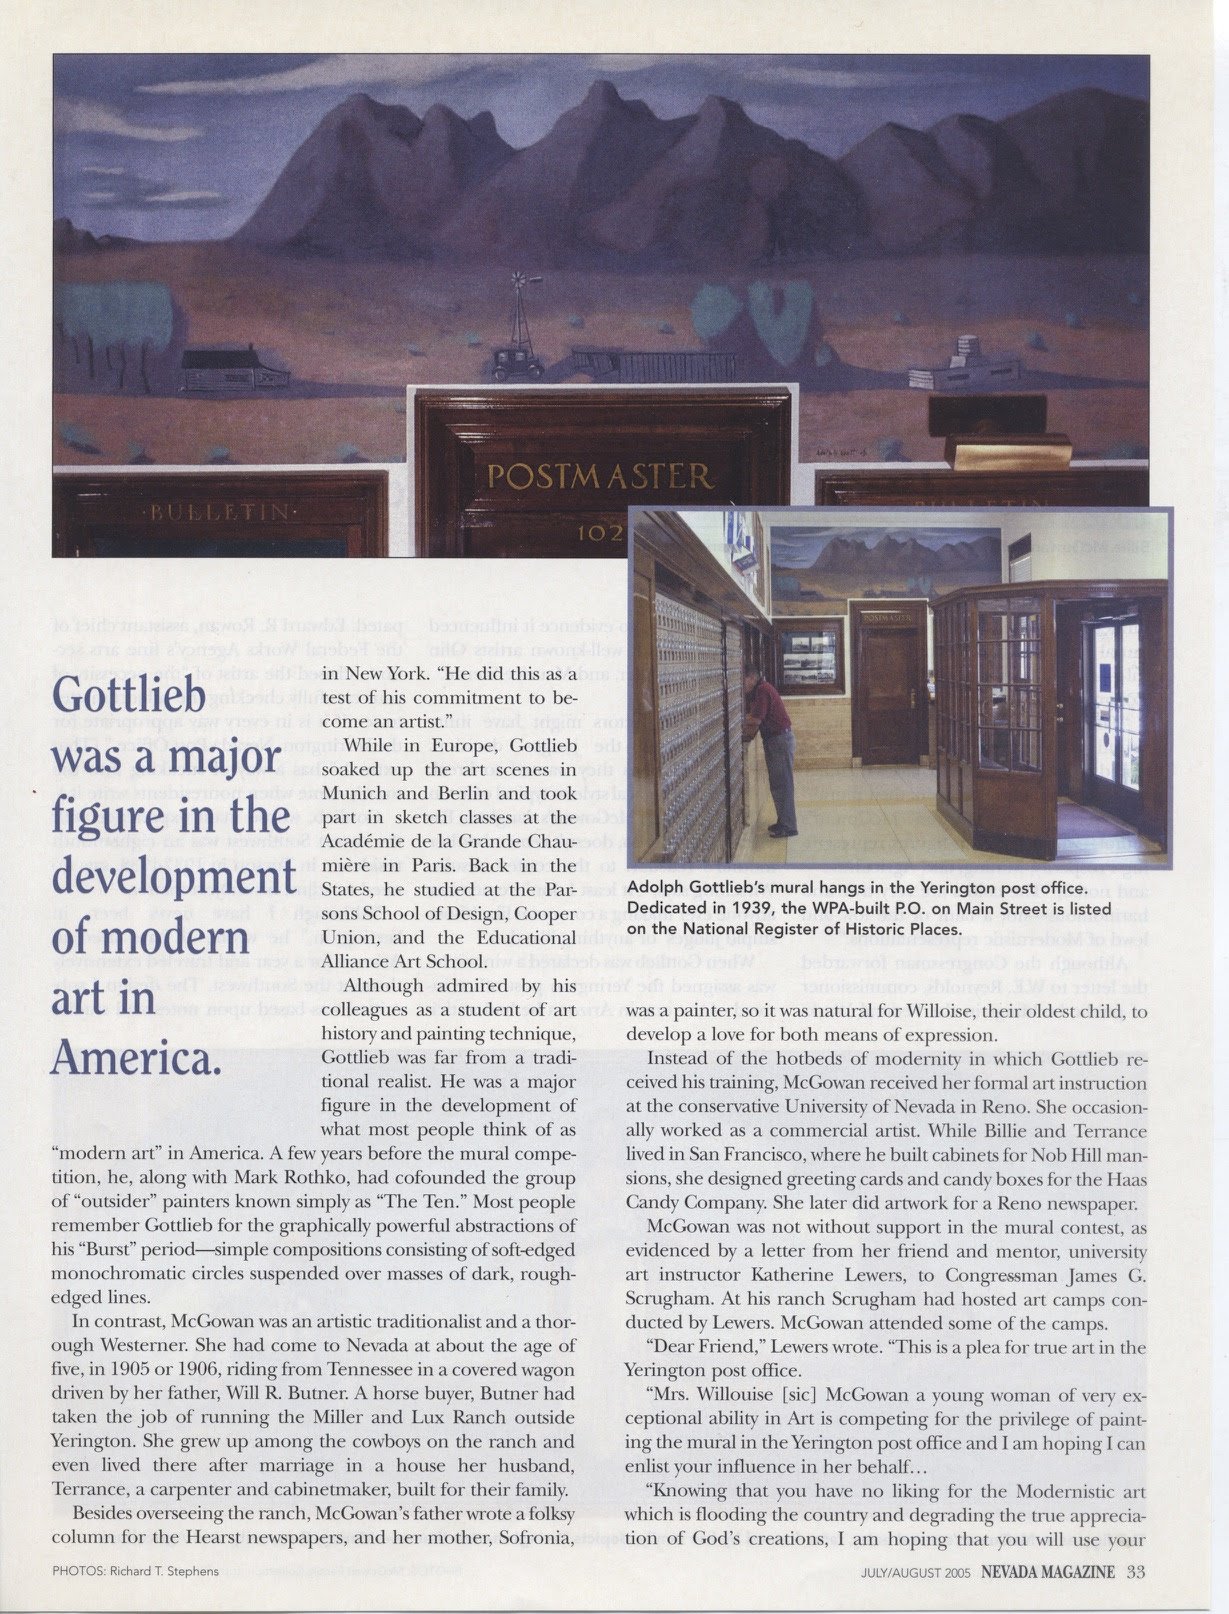 A 2005 article in Nevada Magazine highlighting the making of the mural.